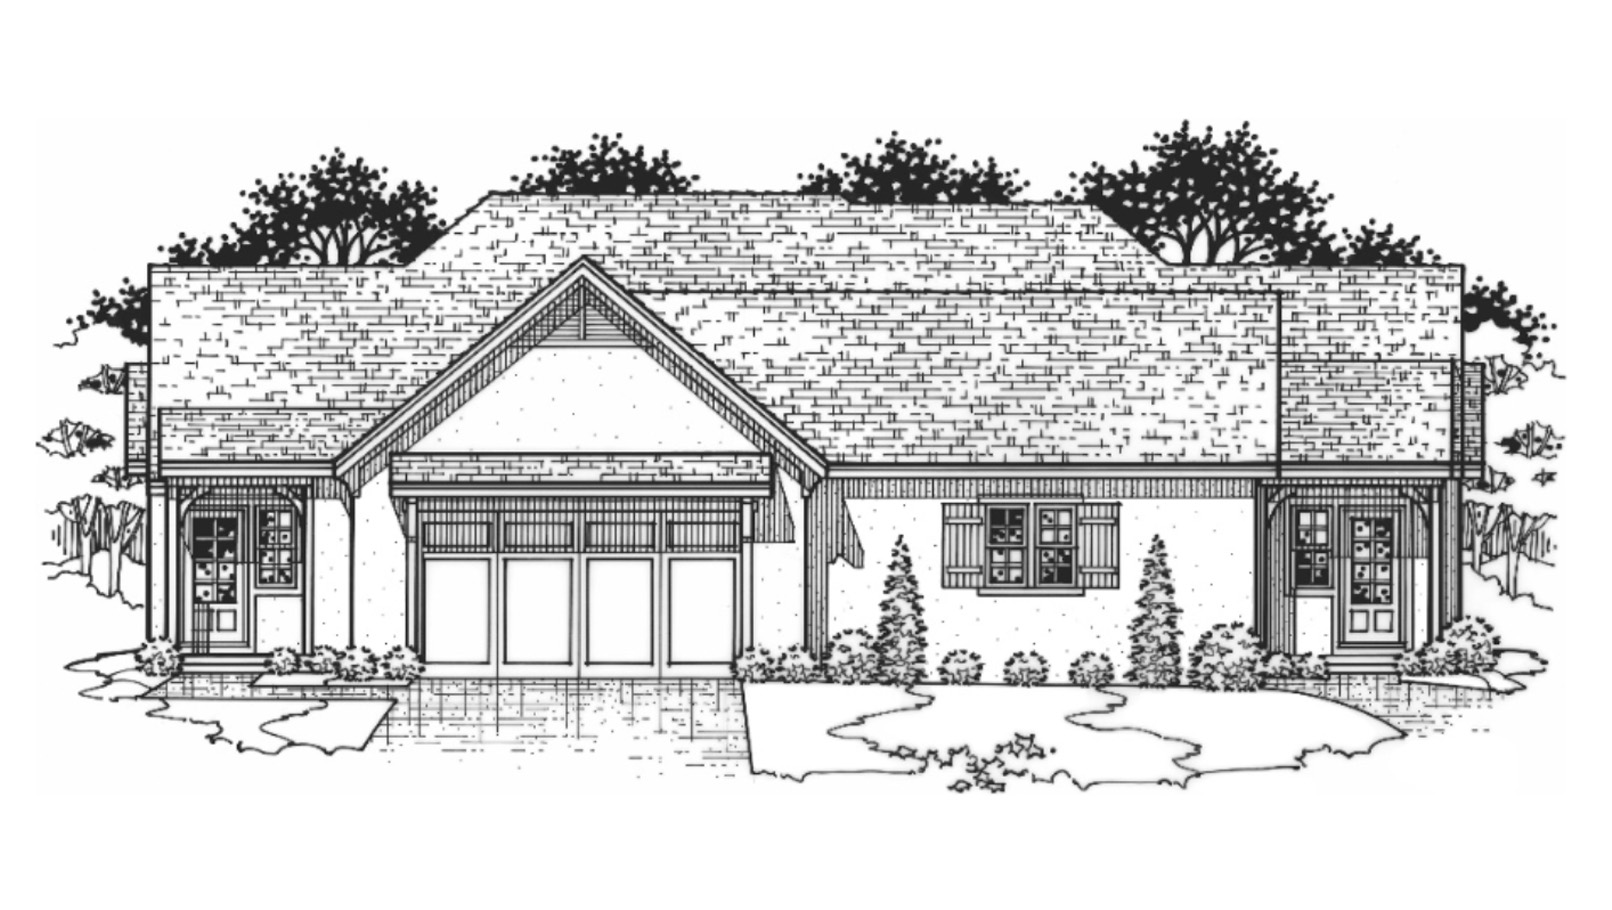 Black and white front elevation of the Cambridge model from Lambie Homes